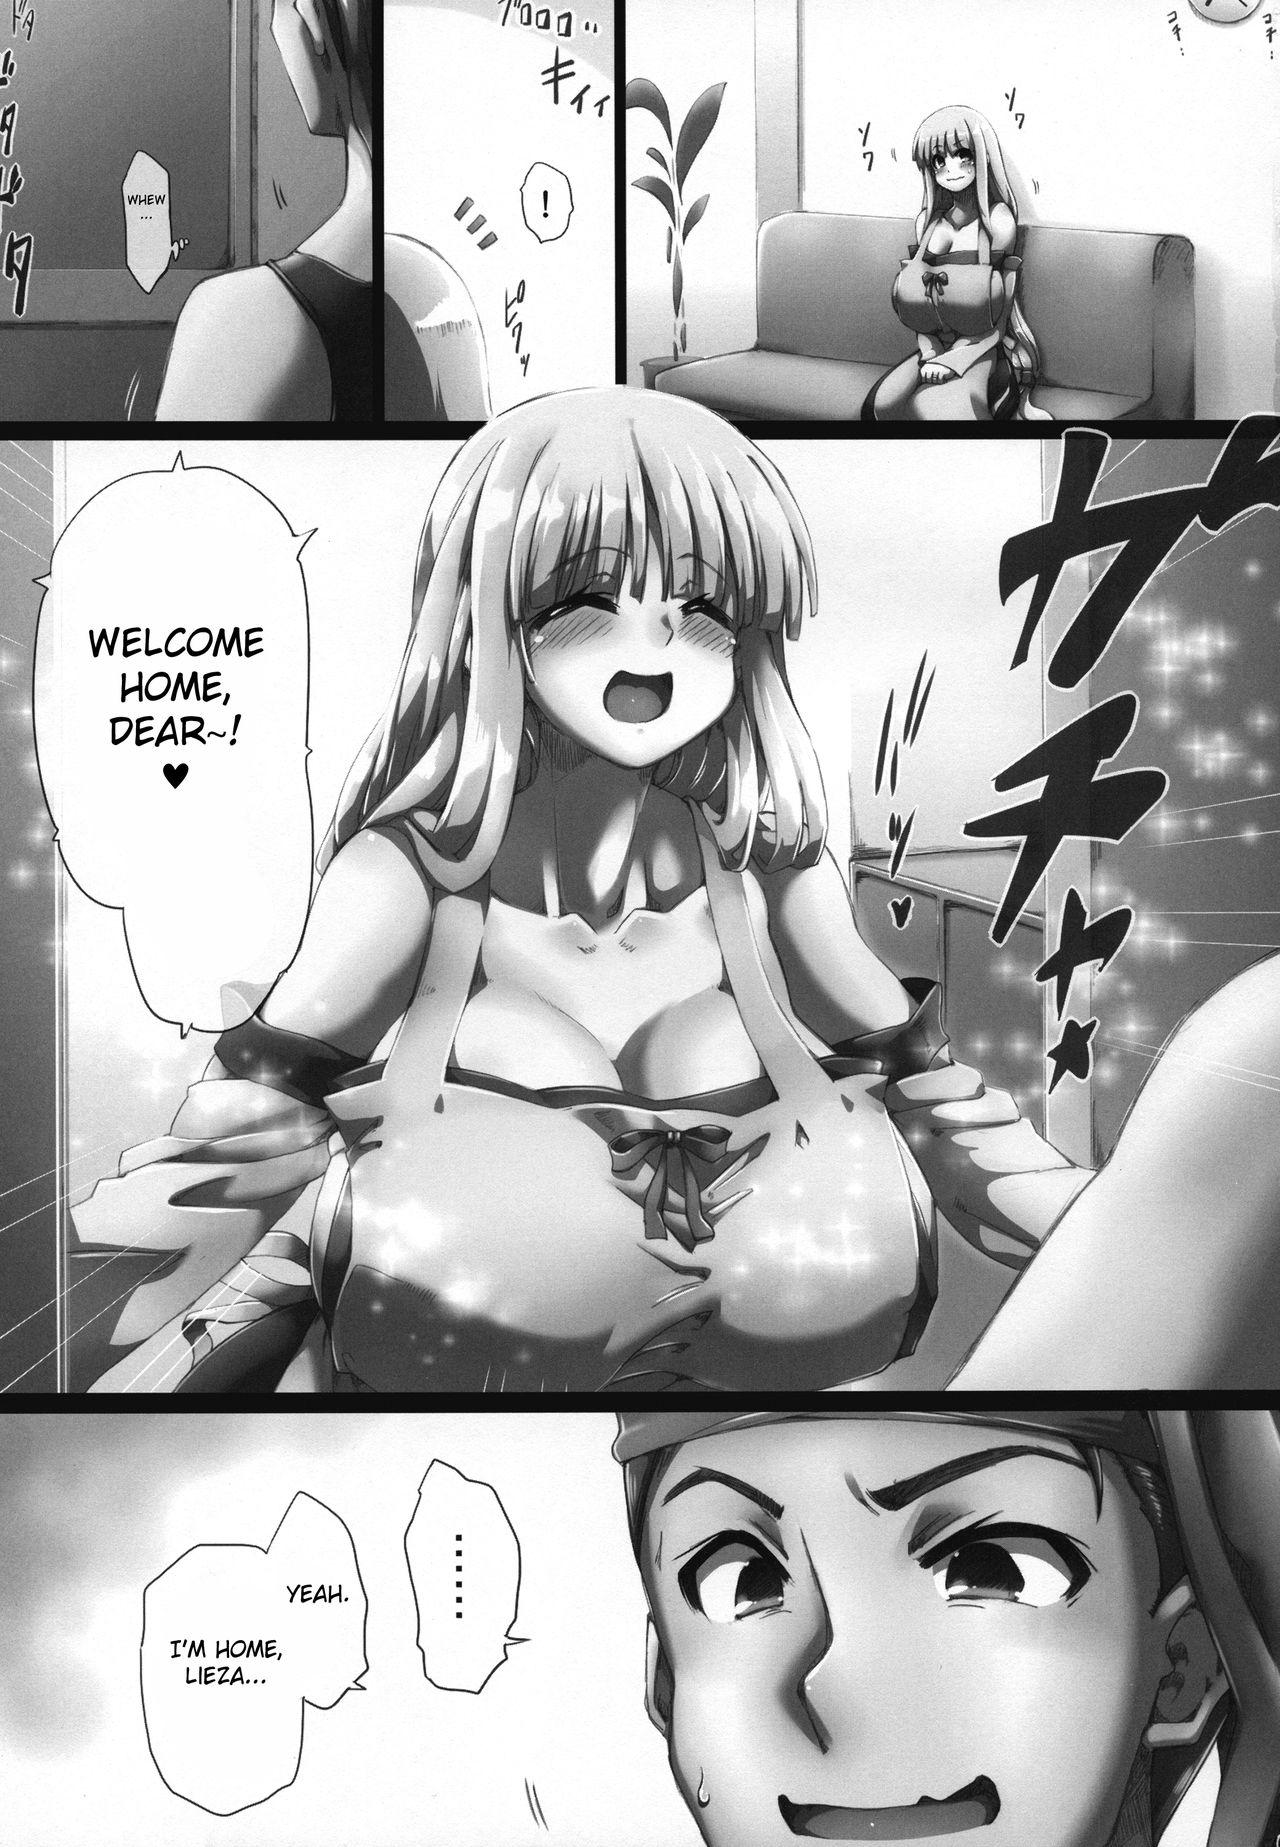 Spanking Dream Home - Arc the lad Big Natural Tits - Page 5